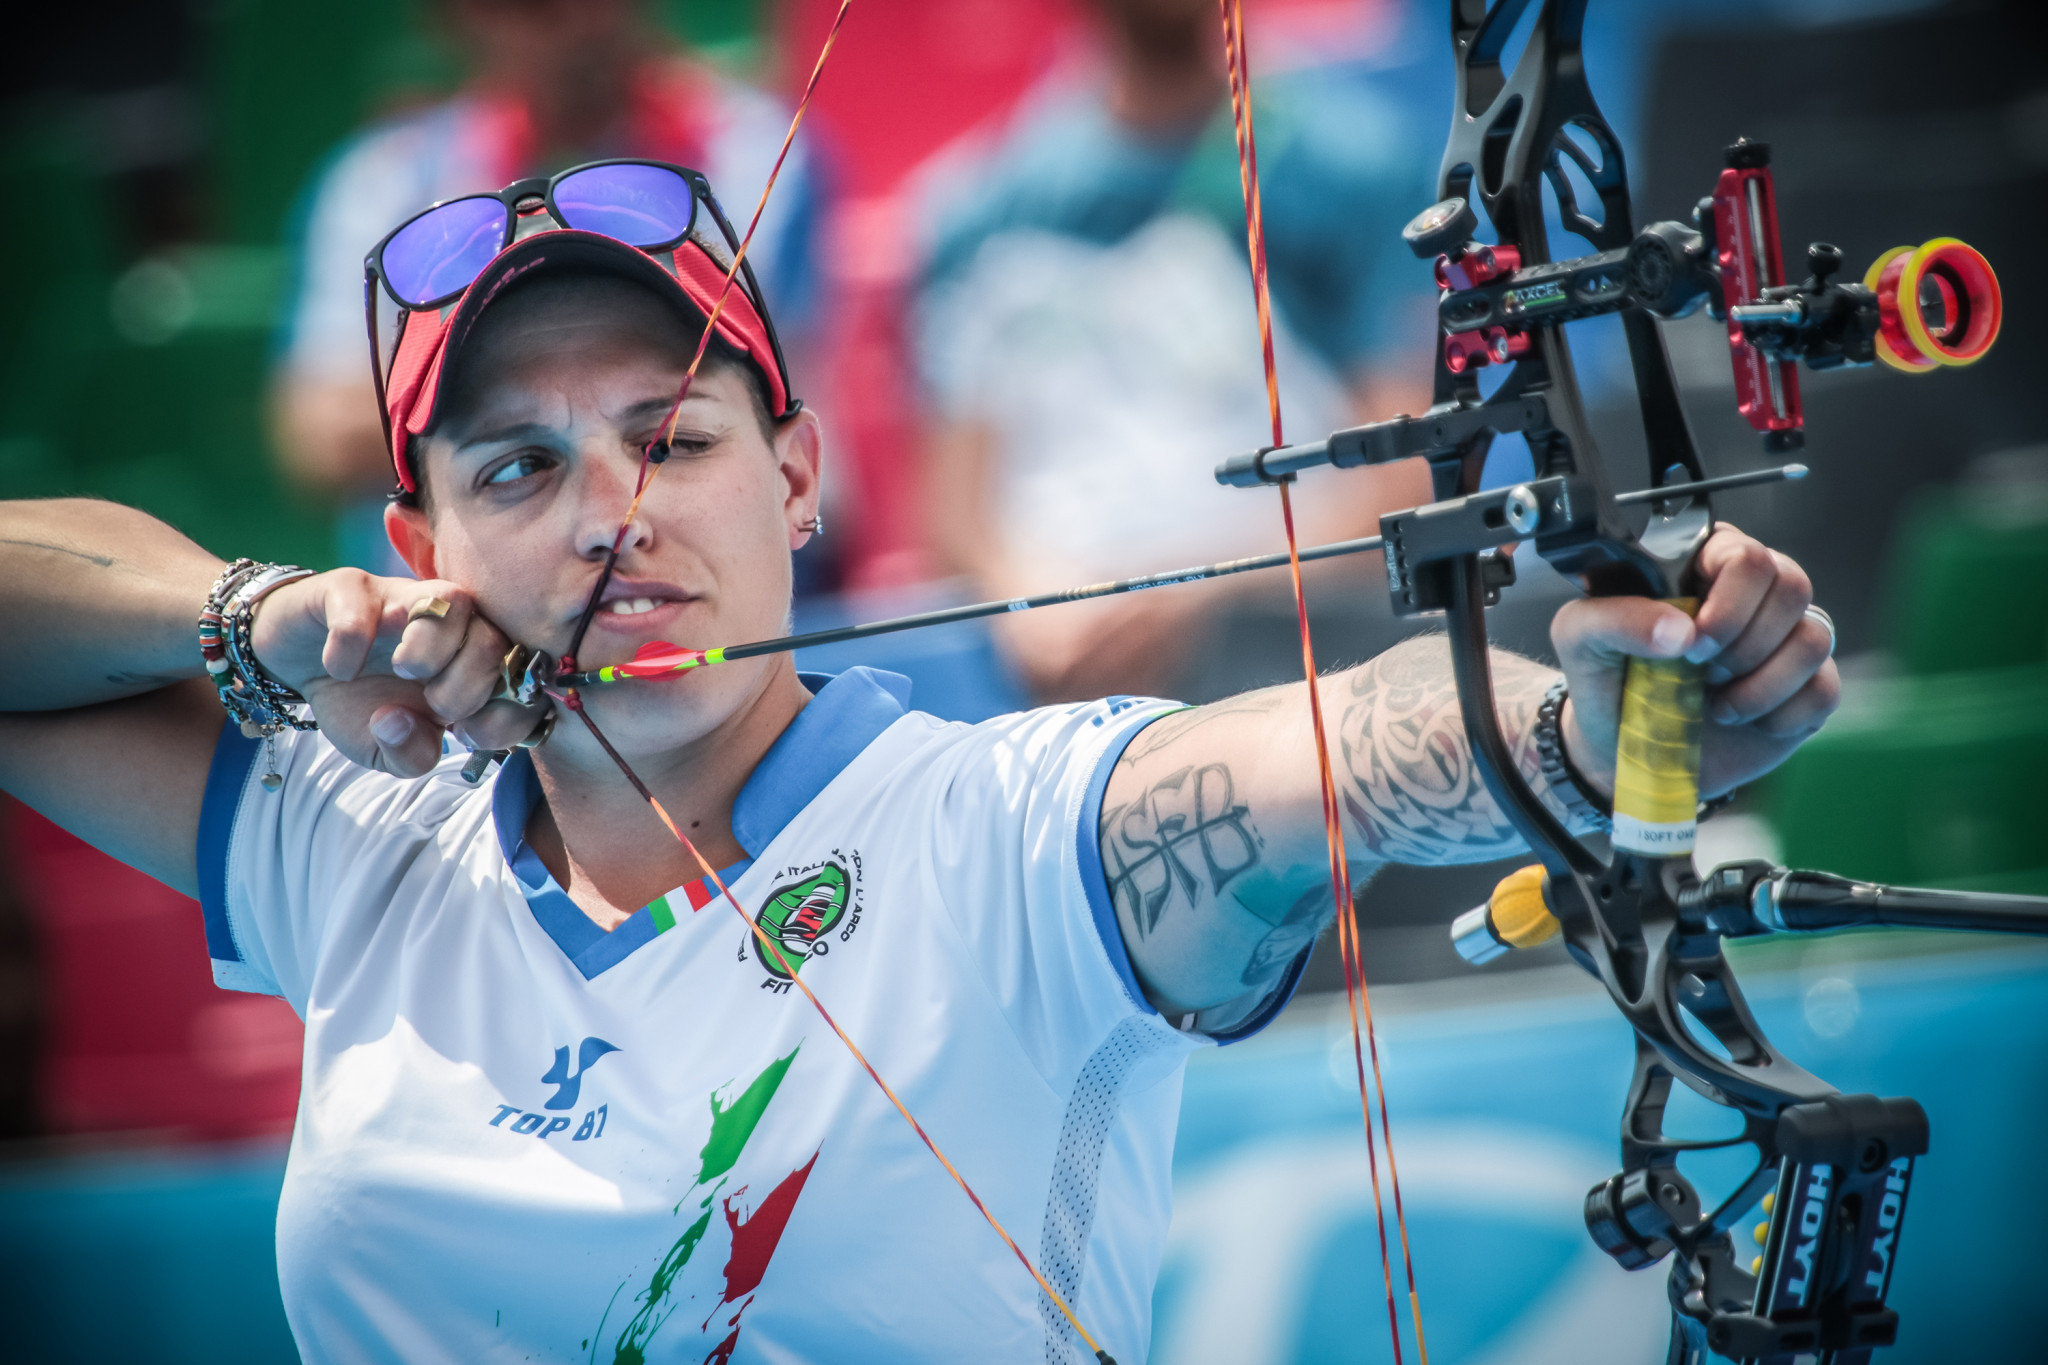 Italy in contention for three team titles at European Archery Championships